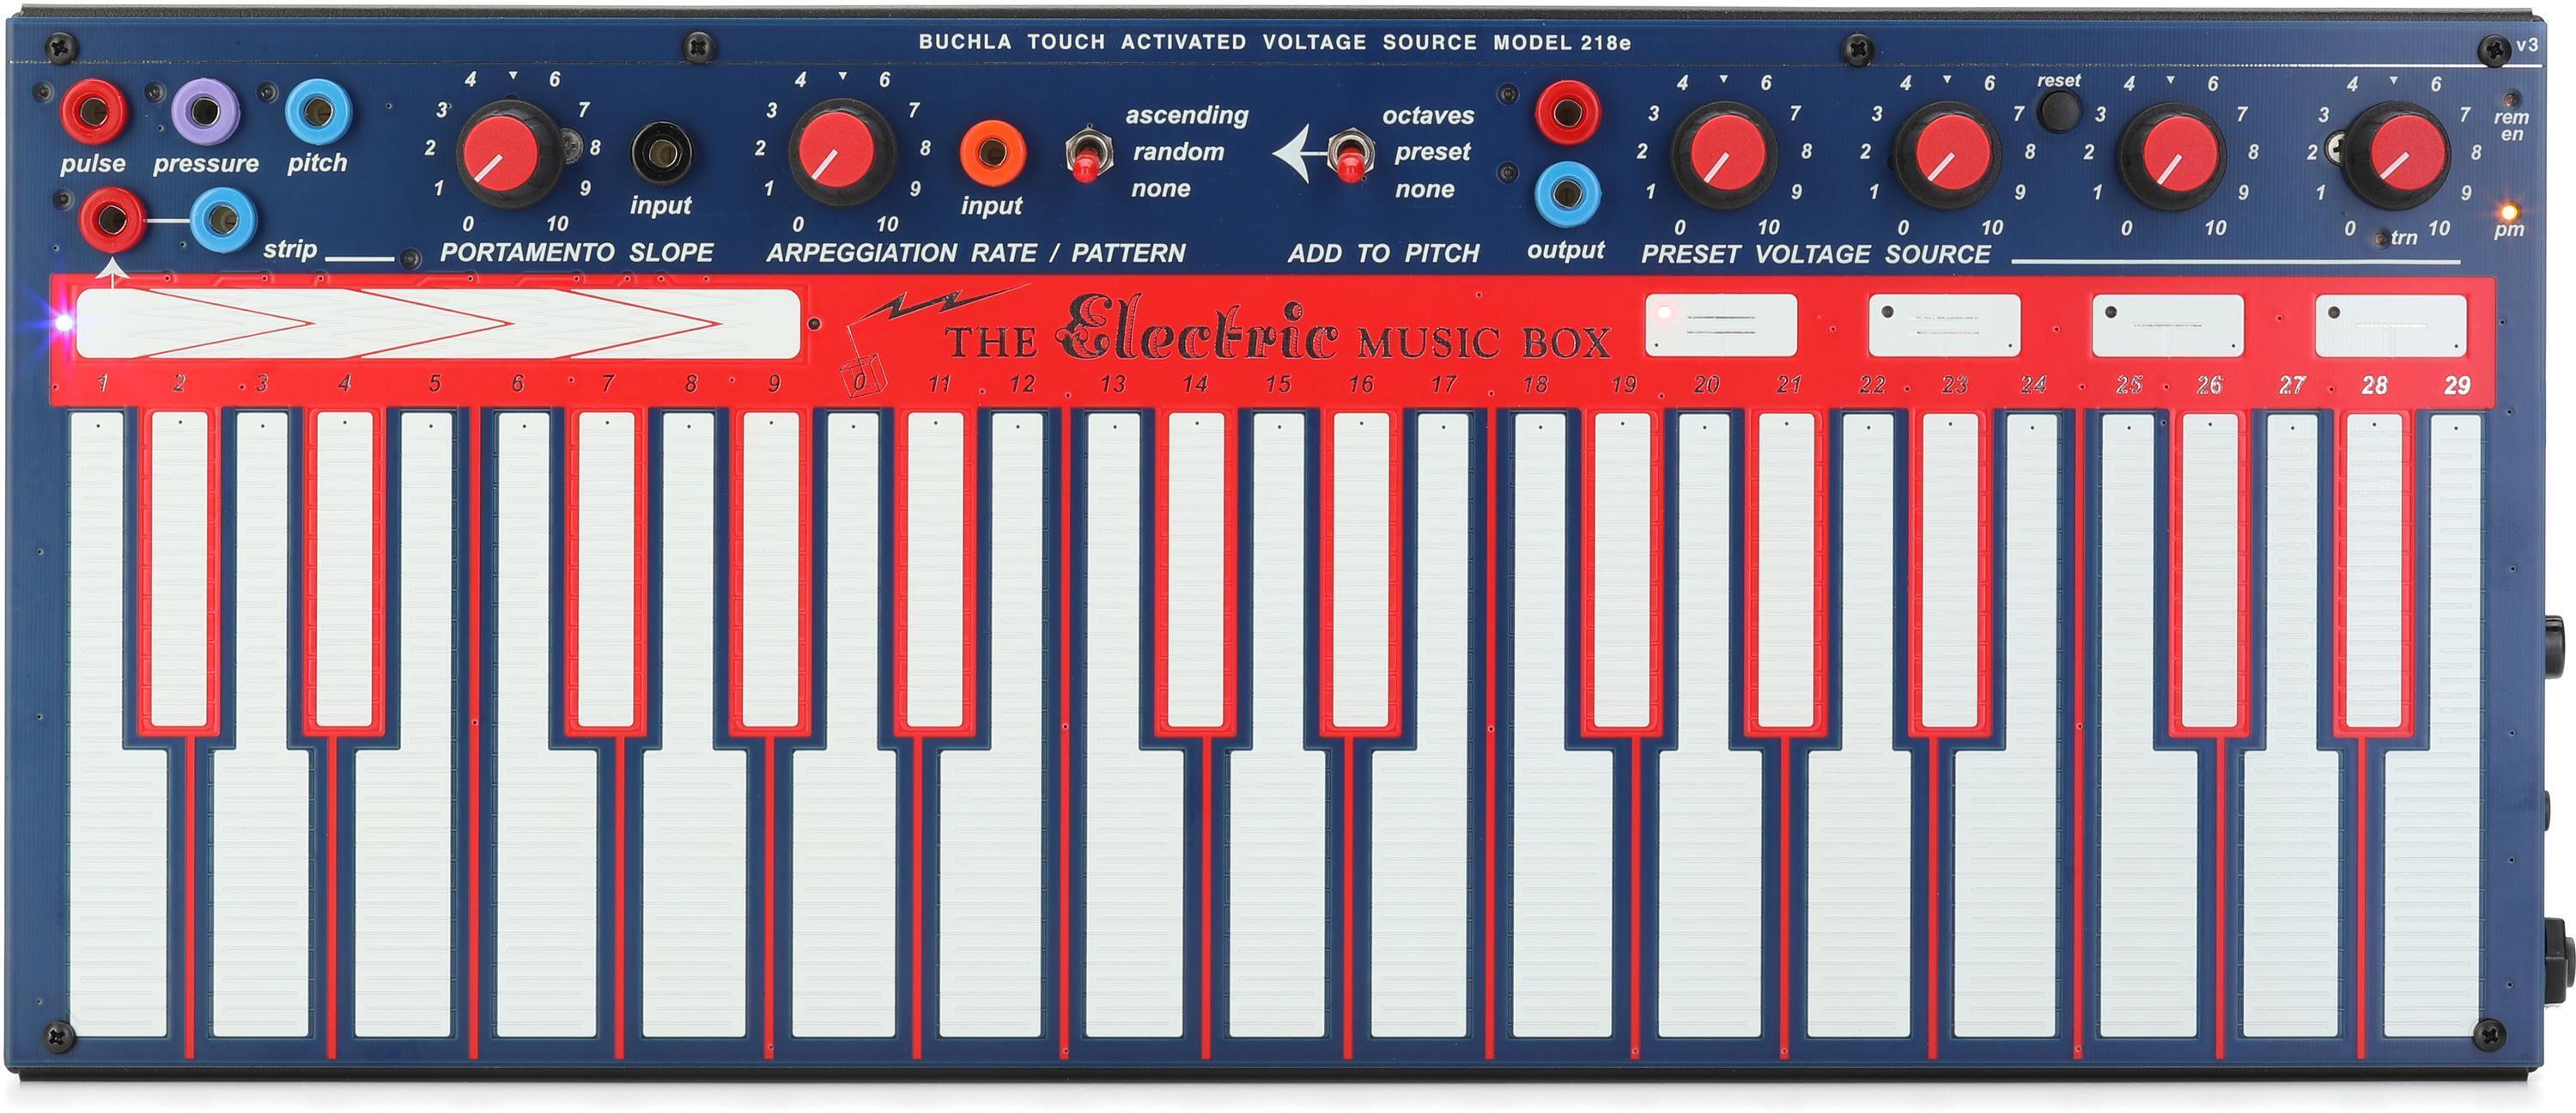 Buchla LEM 218 v3 29-note Capacitive Touch Controller